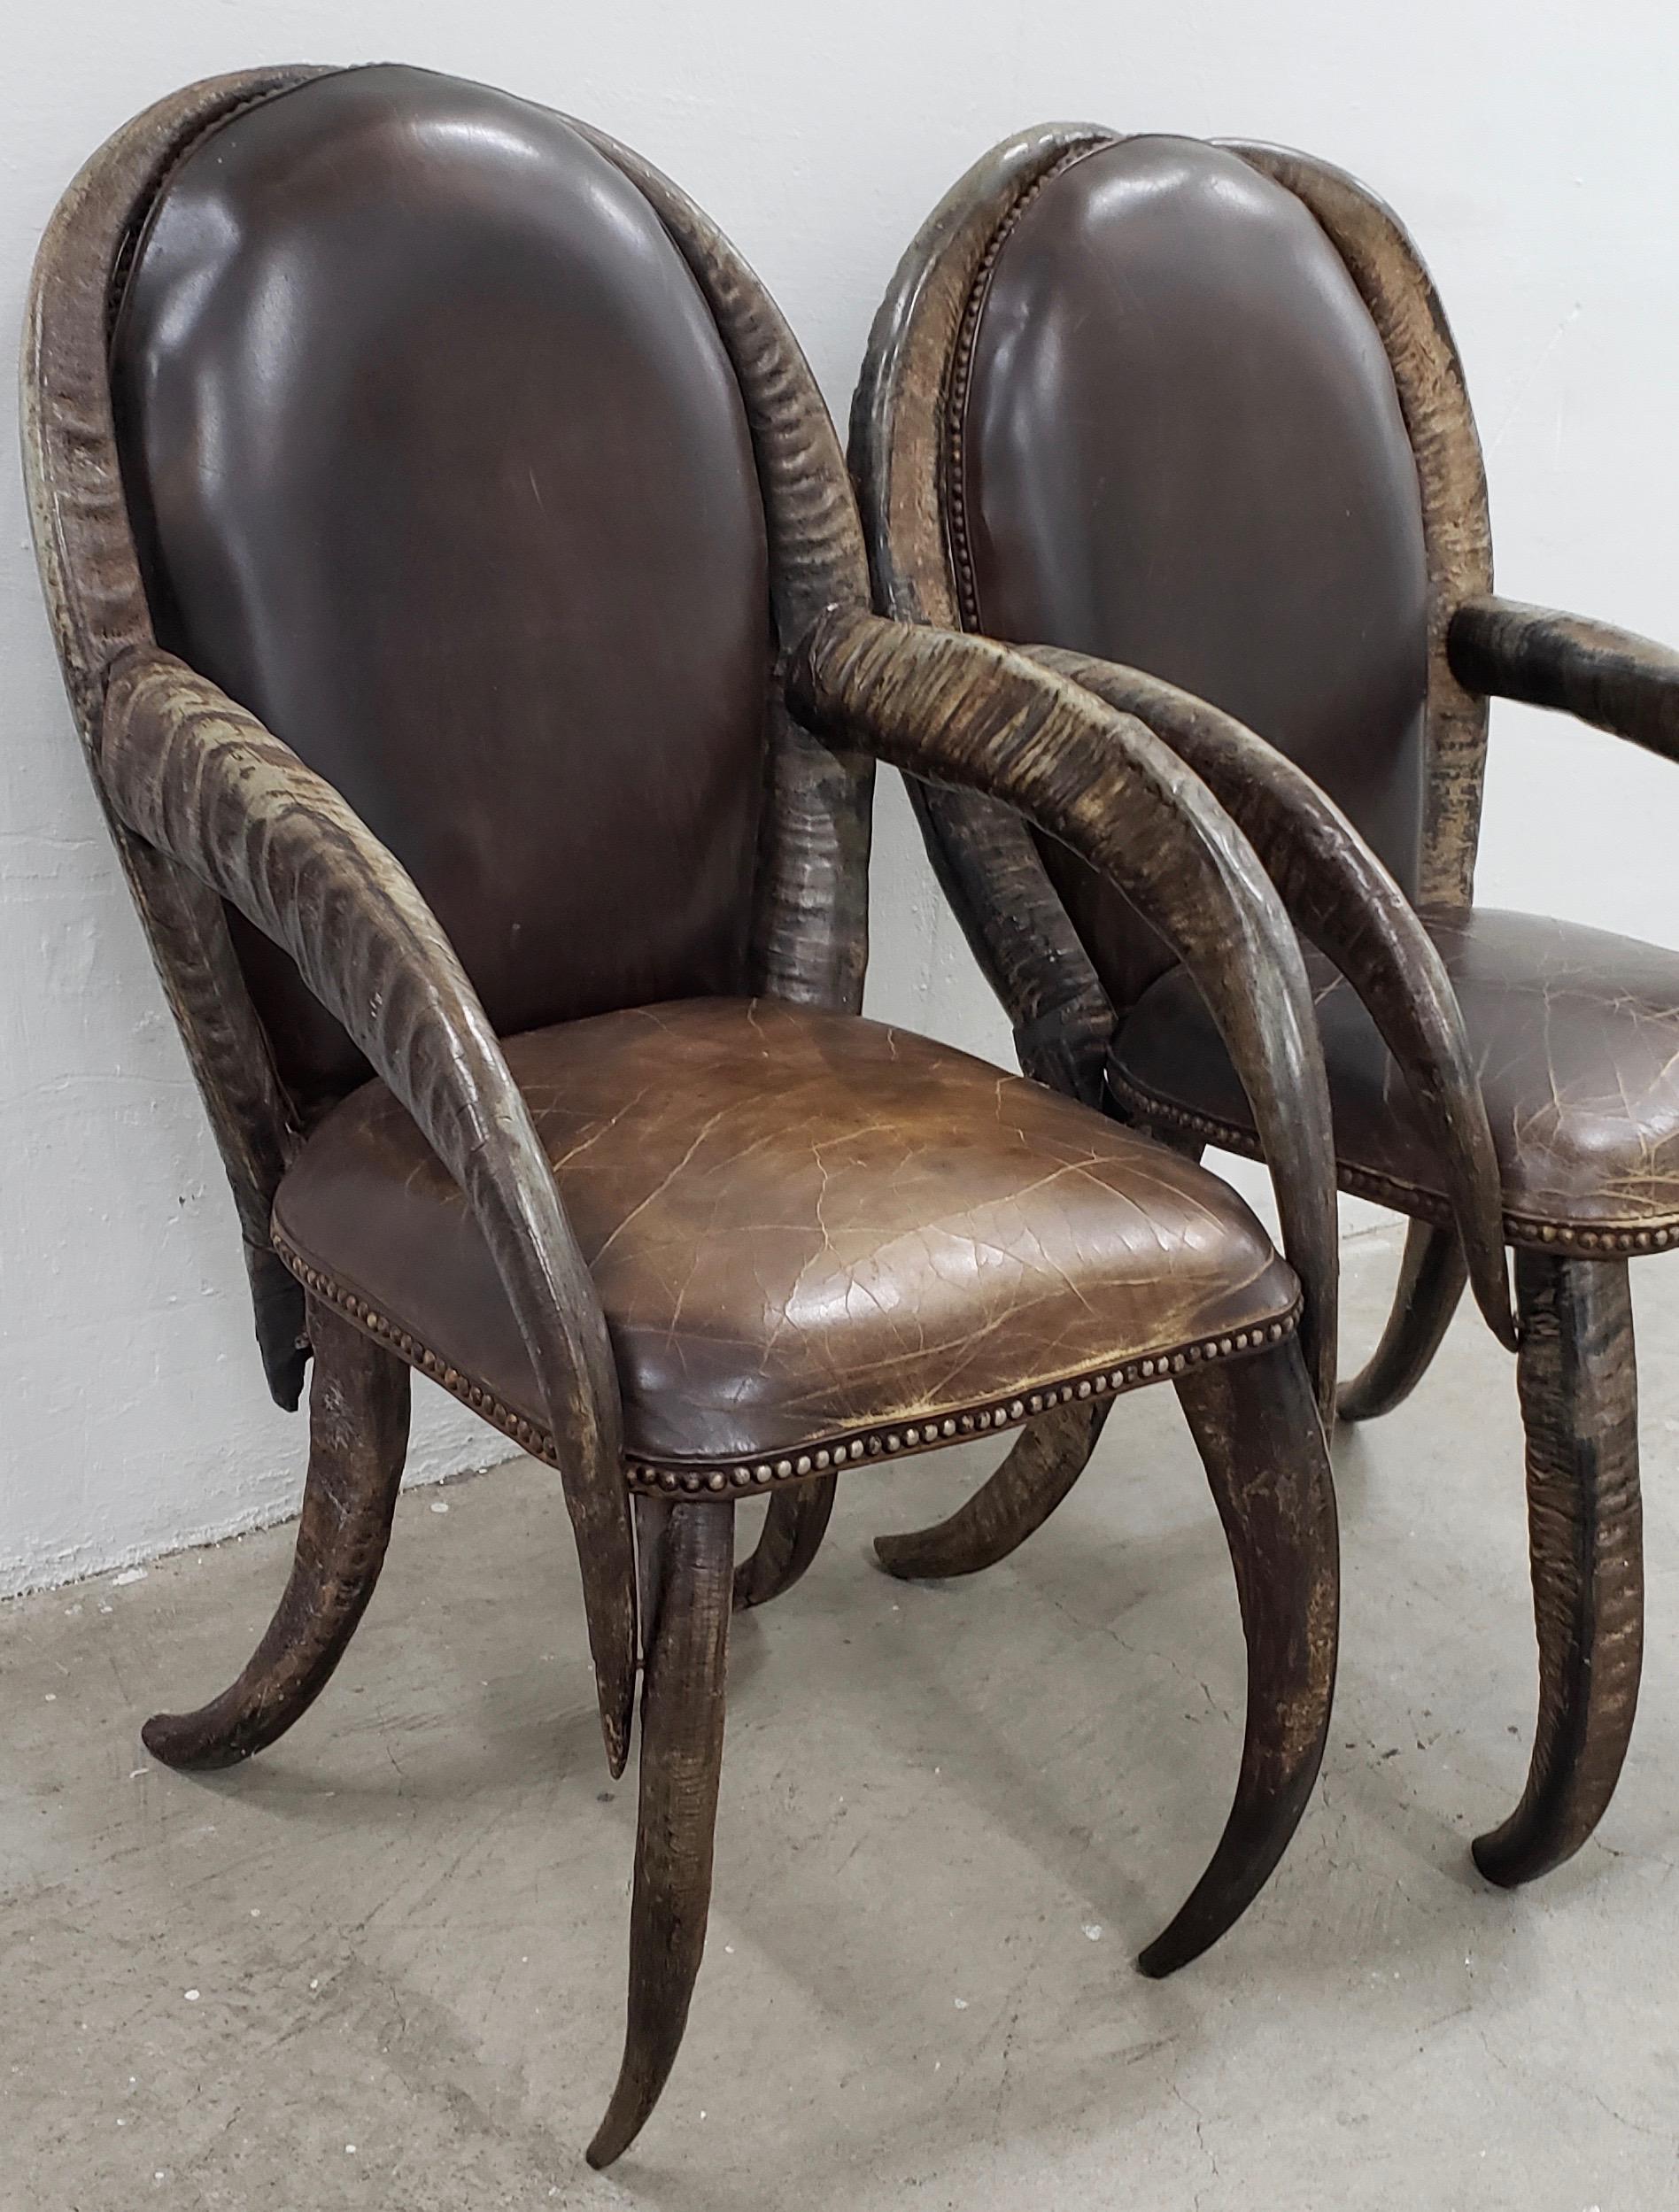 Pair of mid-20th century water buffalo horn and leather armchairs

Fantastic pair of leather and horn arm chairs. The leather seats are lightly worn and the chairs are solid and comfortable to sit in.

Each chair measures 20